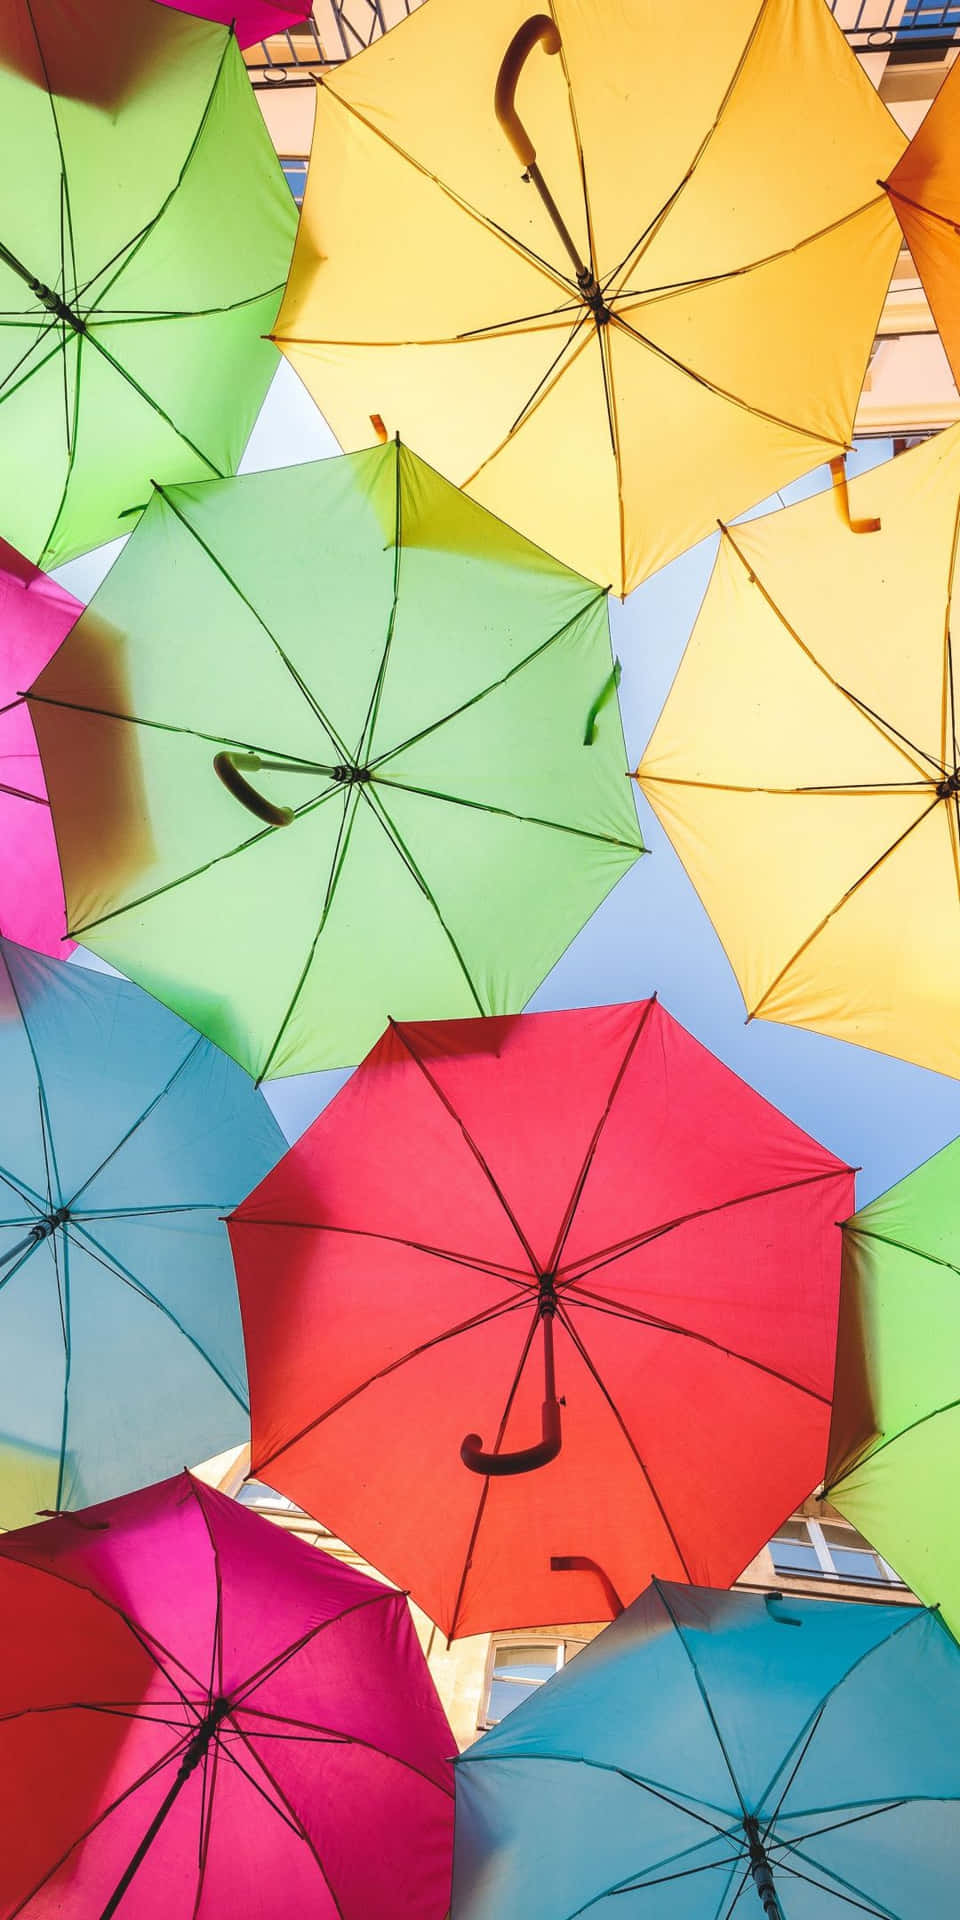 Colorful Umbrella Canopy Aerial View.jpg Background